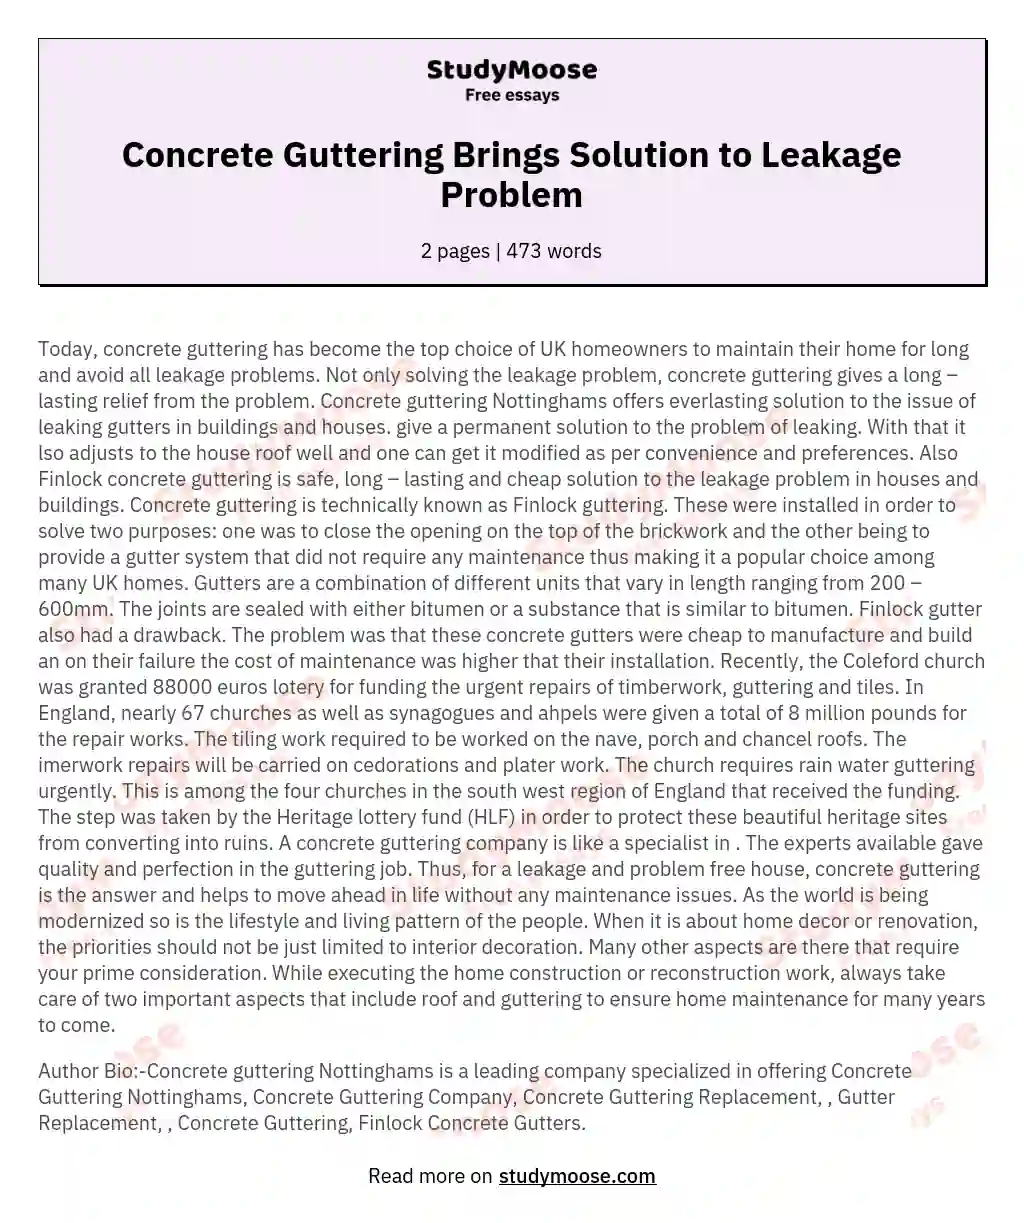 Concrete Guttering Brings Solution to Leakage Problem essay